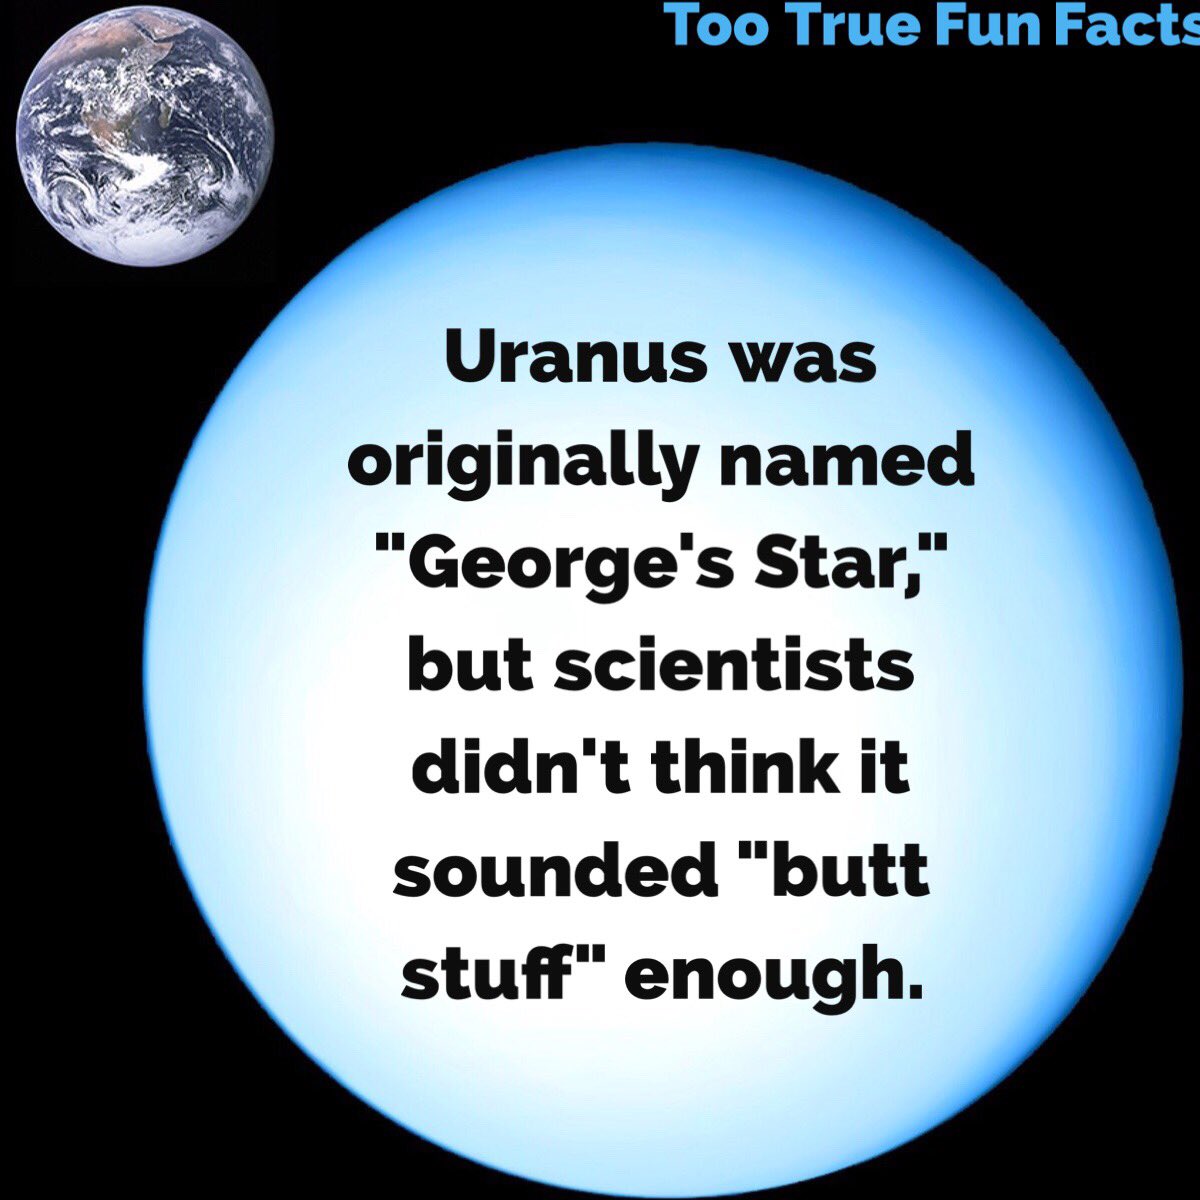 Too True Fun Facts On Twitter They Like That Uranus Planet Astronomy Science Sciencesunday Planets Lol Comedy Funny Trivia Facts Https T Co W3lhnfqxd4 Twitter